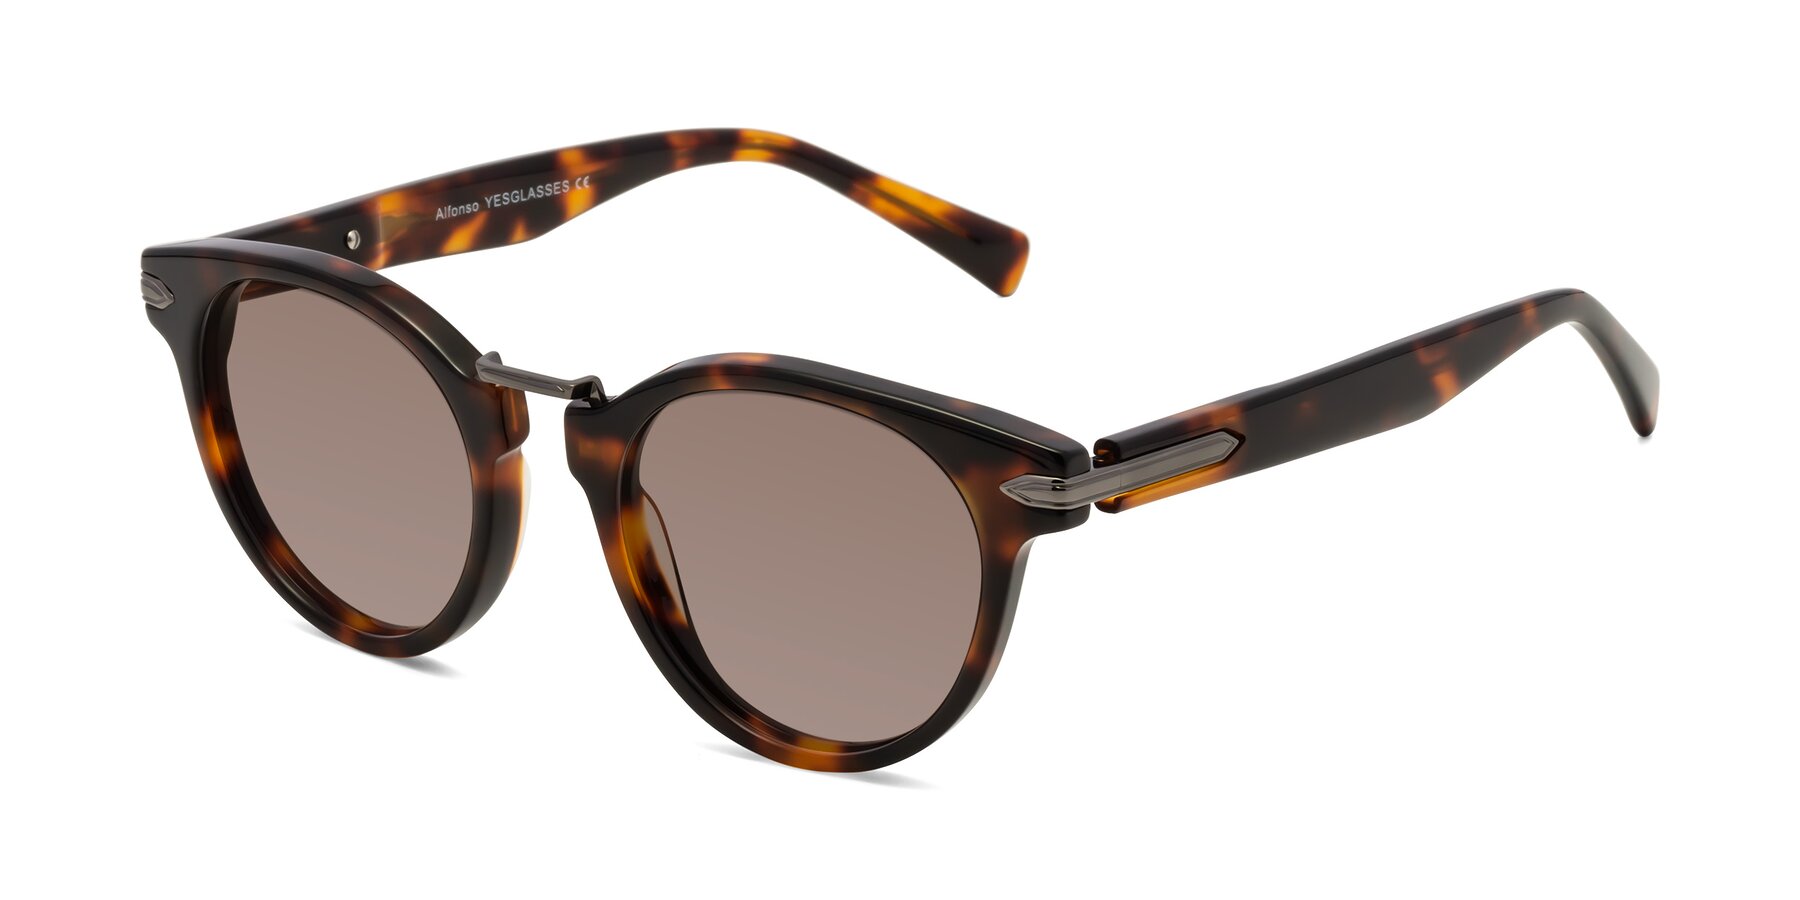 Angle of Alfonso in Tortoise with Medium Brown Tinted Lenses